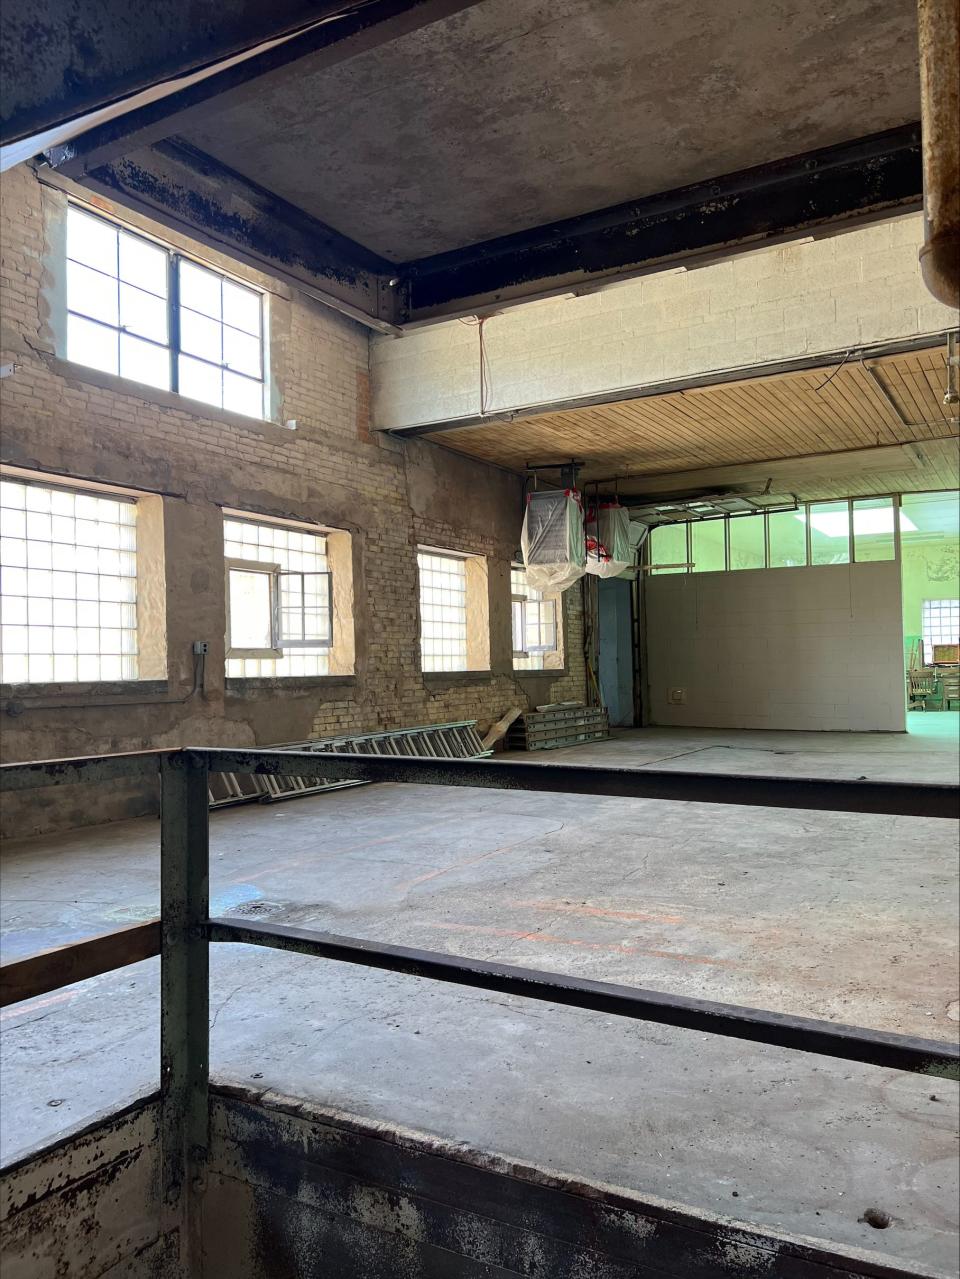 Milwaukee developer Dieter Wegner will transform the former brewery on 12th Avenue into a community art hub. The space will be filled with creative businesses and residential spaces to be known as Grafton Creative.